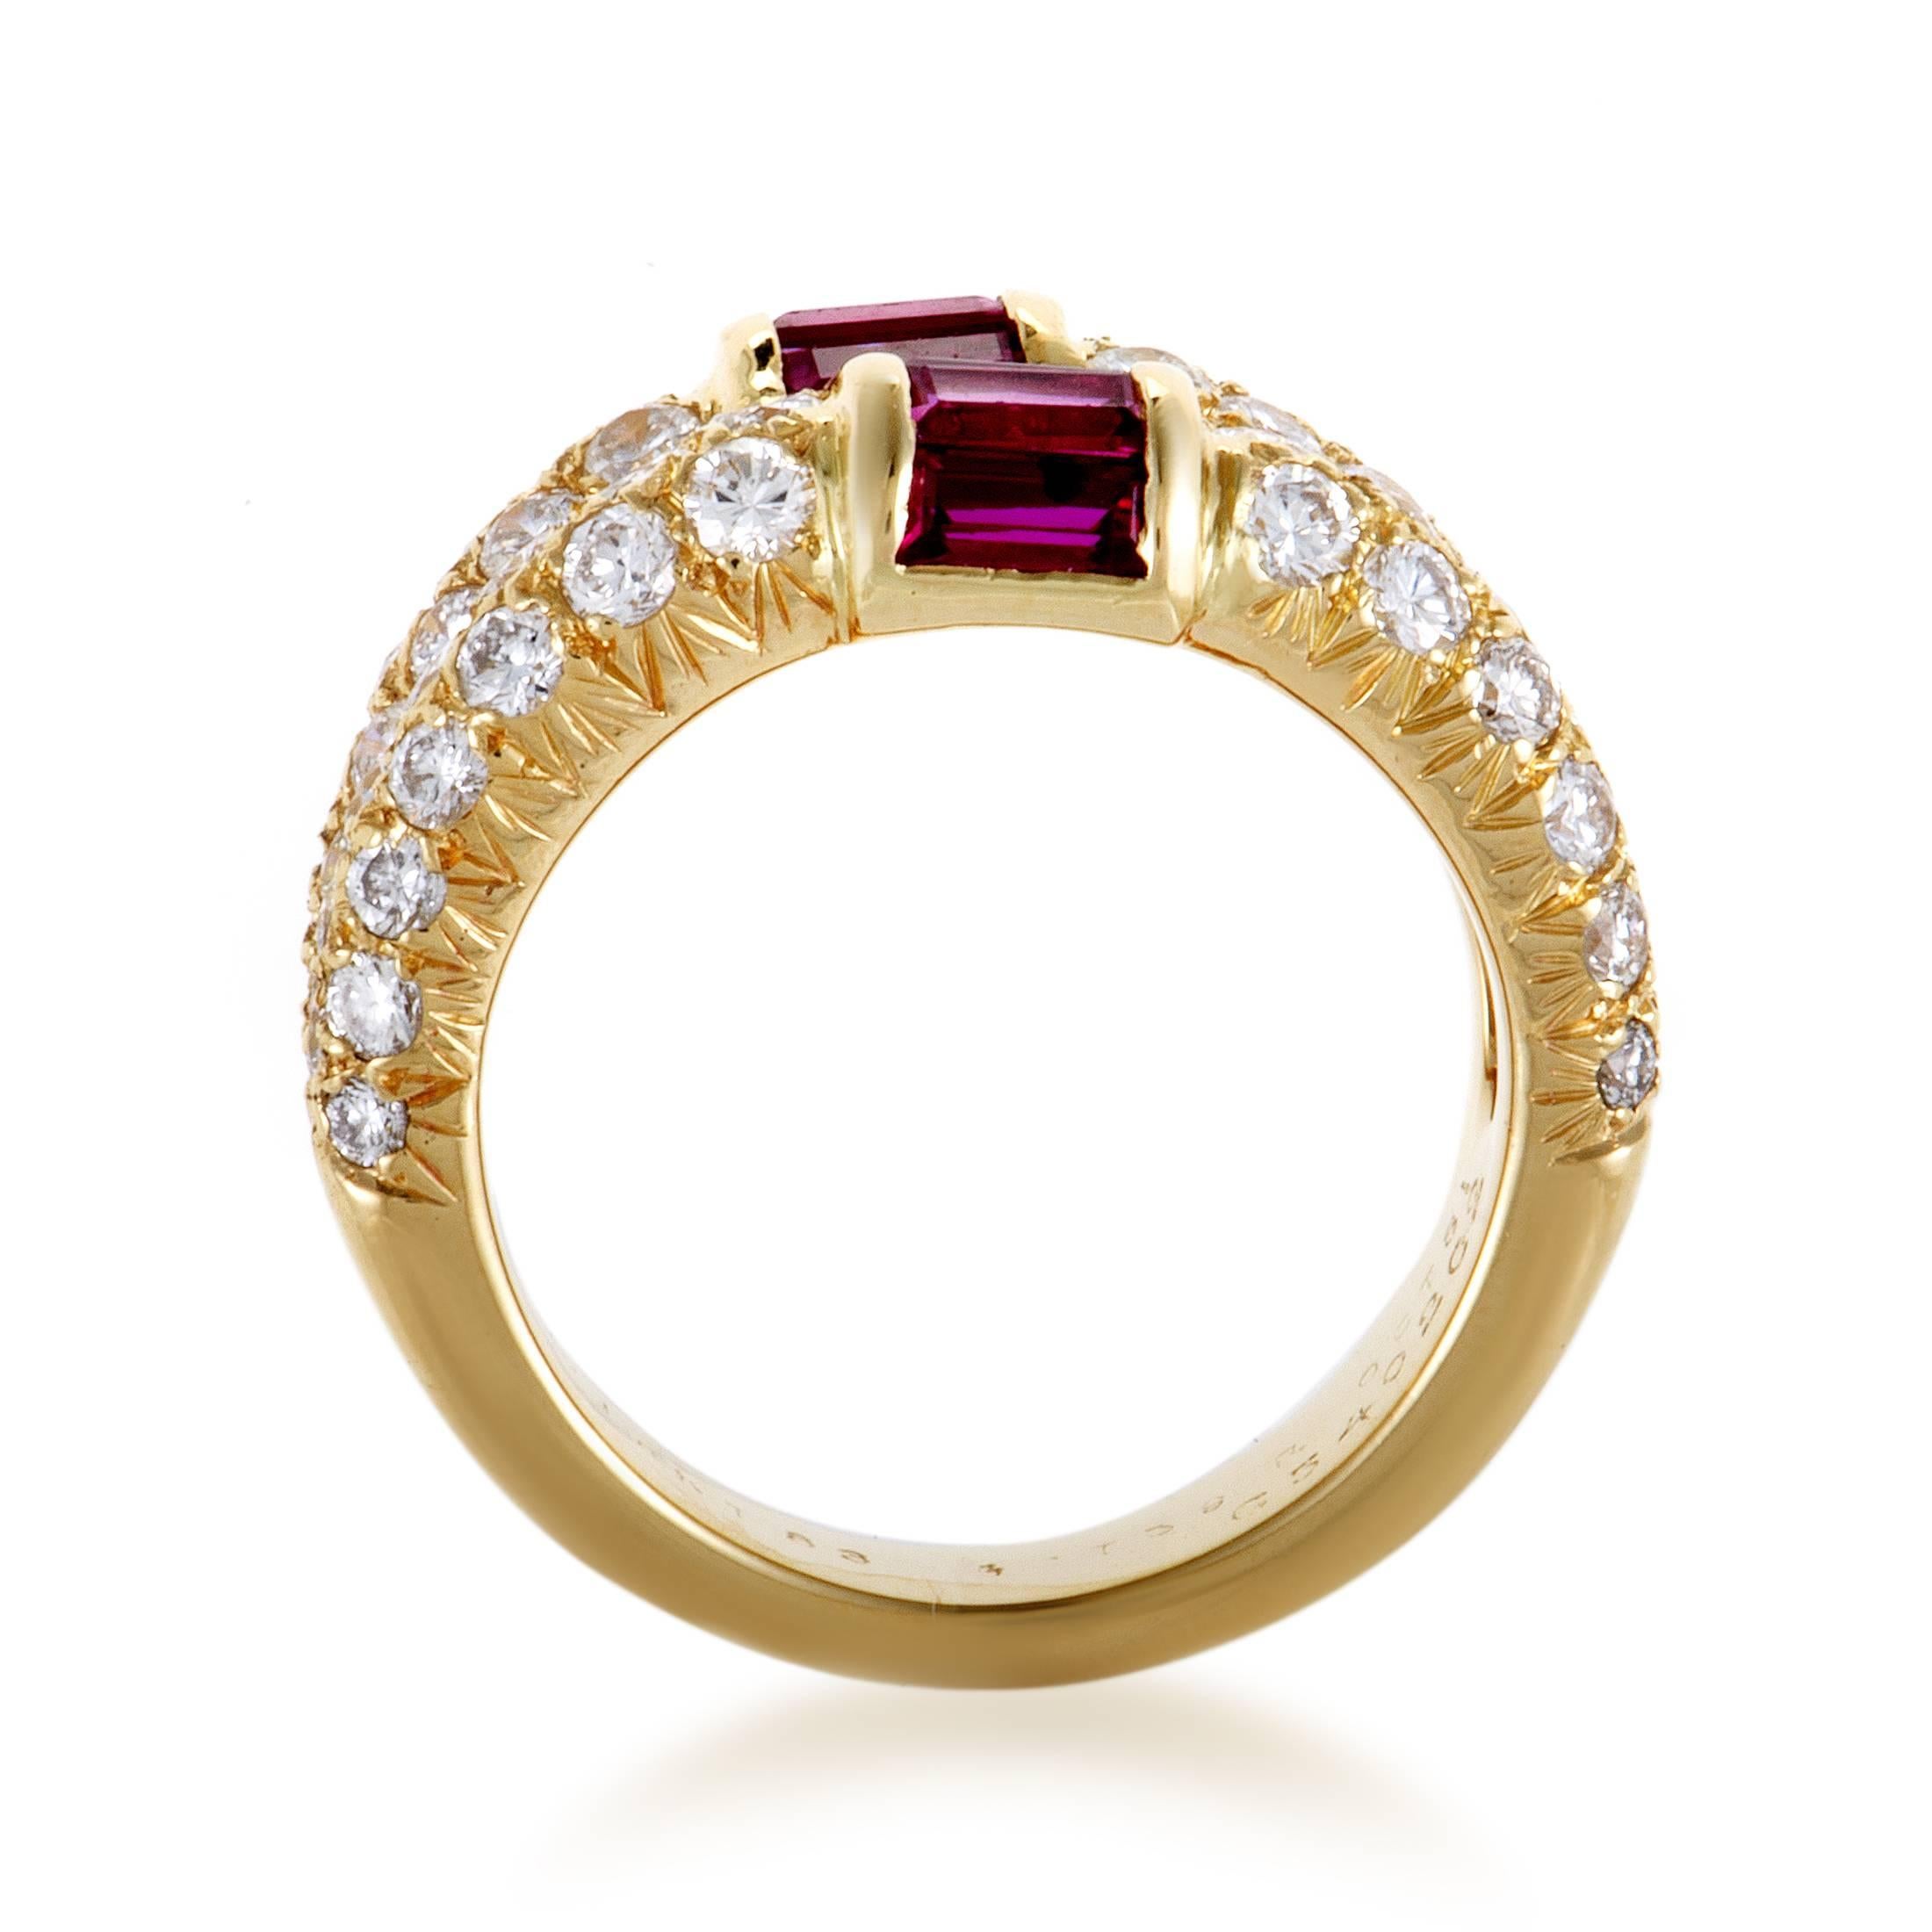 Boasting a glamorous spirit and a stylish blend of precious materials, this delightful ring from Van Cleef & Arpels is made of prestigious 18K yellow gold and adorned with 1.00 carat of sparkling diamonds and 0.81ct of striking rubies.
Included